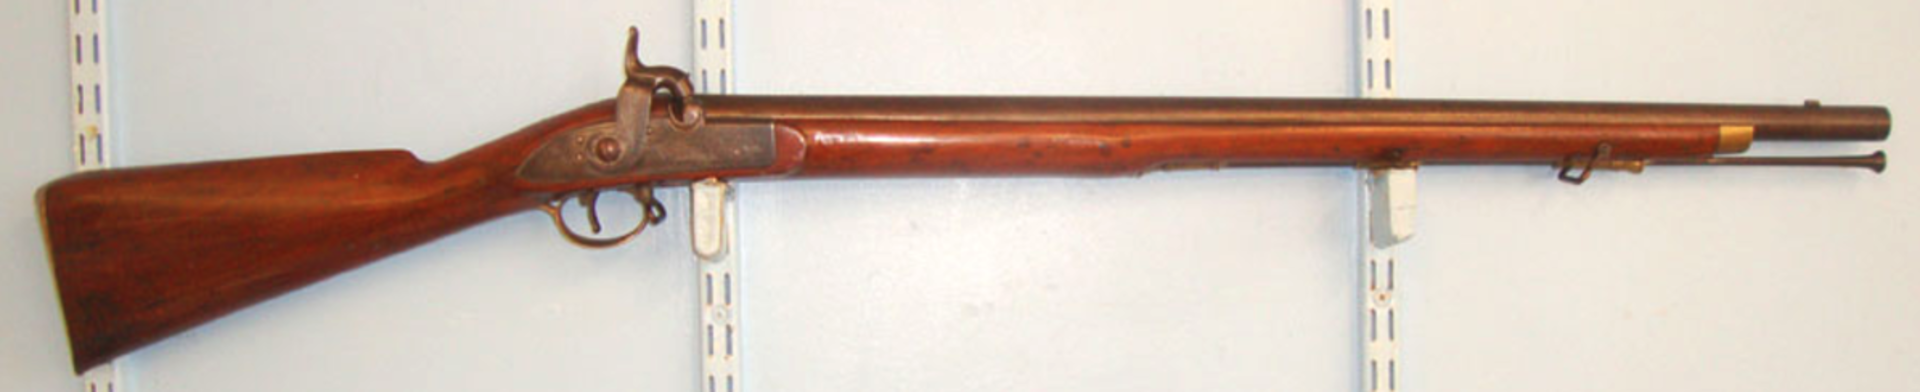 SUPERB, Early 1800’s Thomas Richards Bristol, British Officer's Percussion .750 Smooth Bore Musket